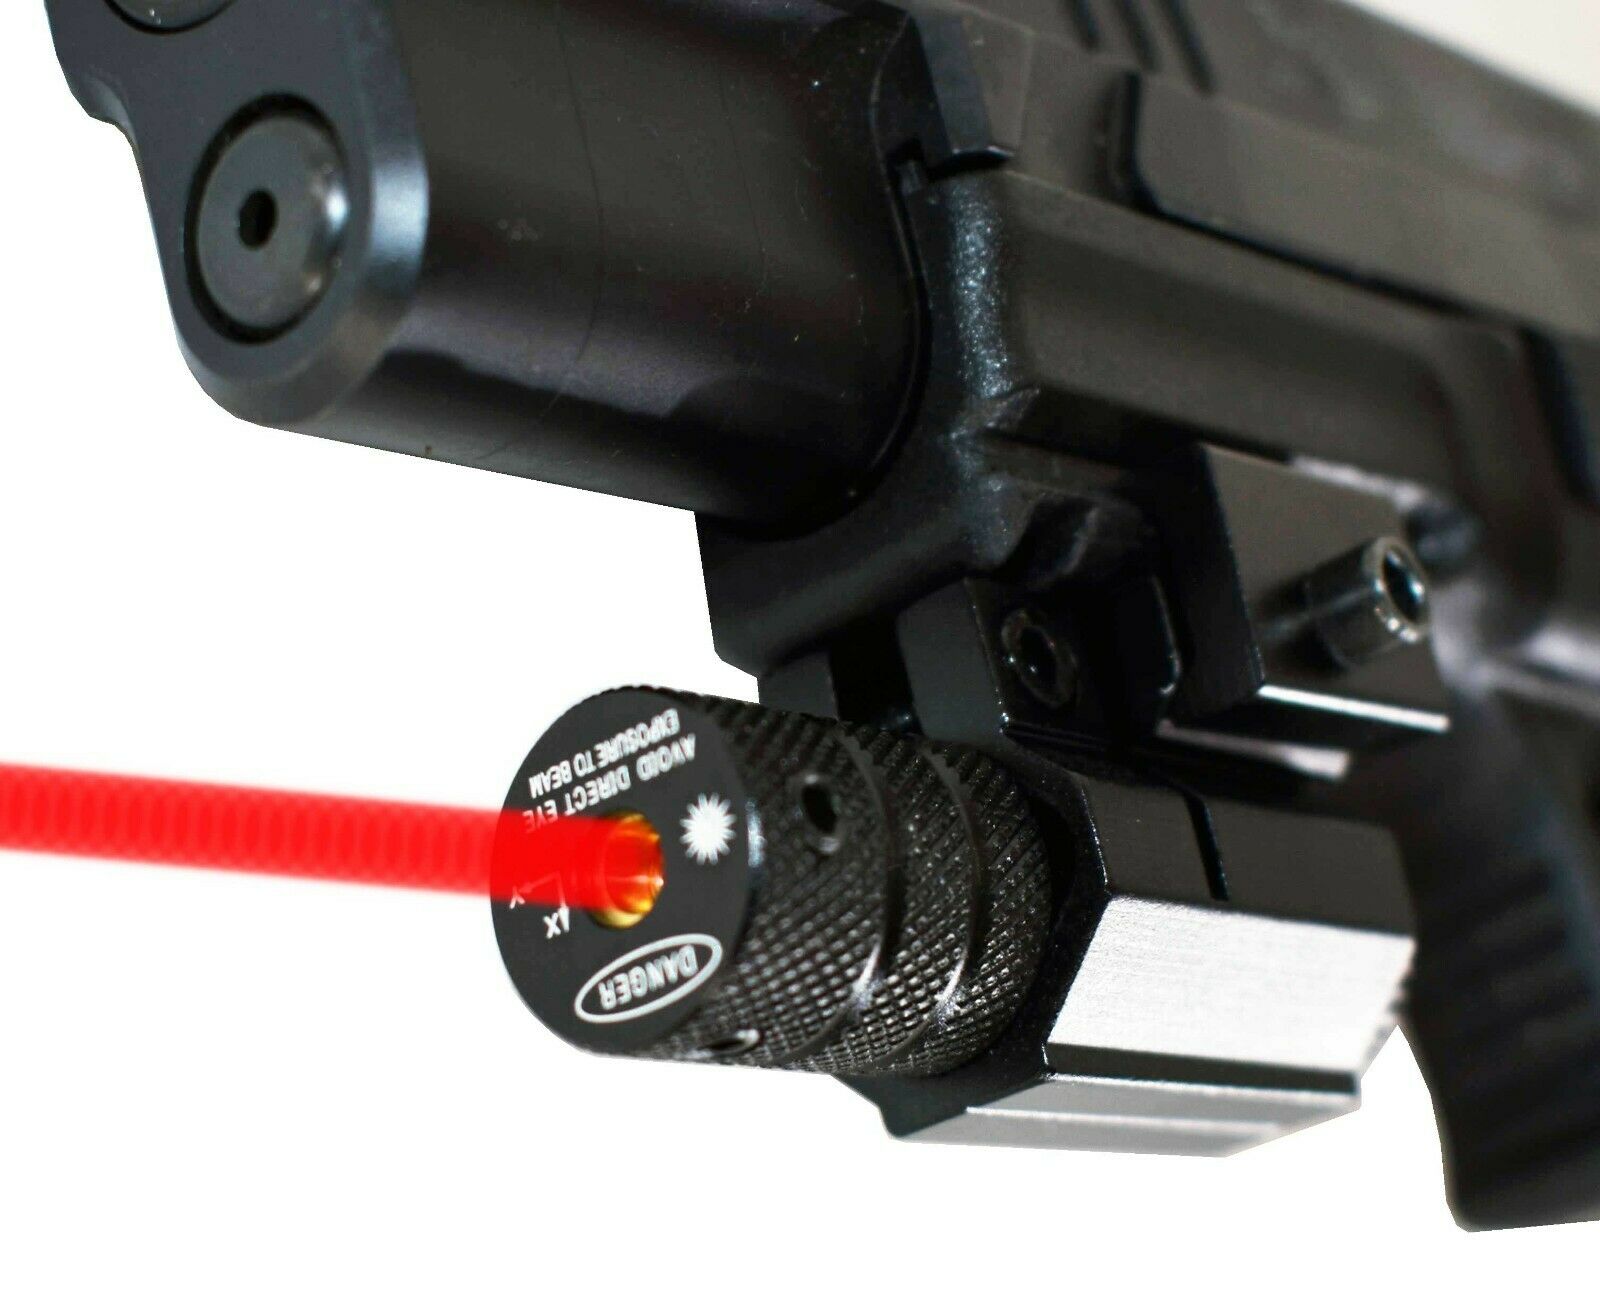 smith and wesson red laser.